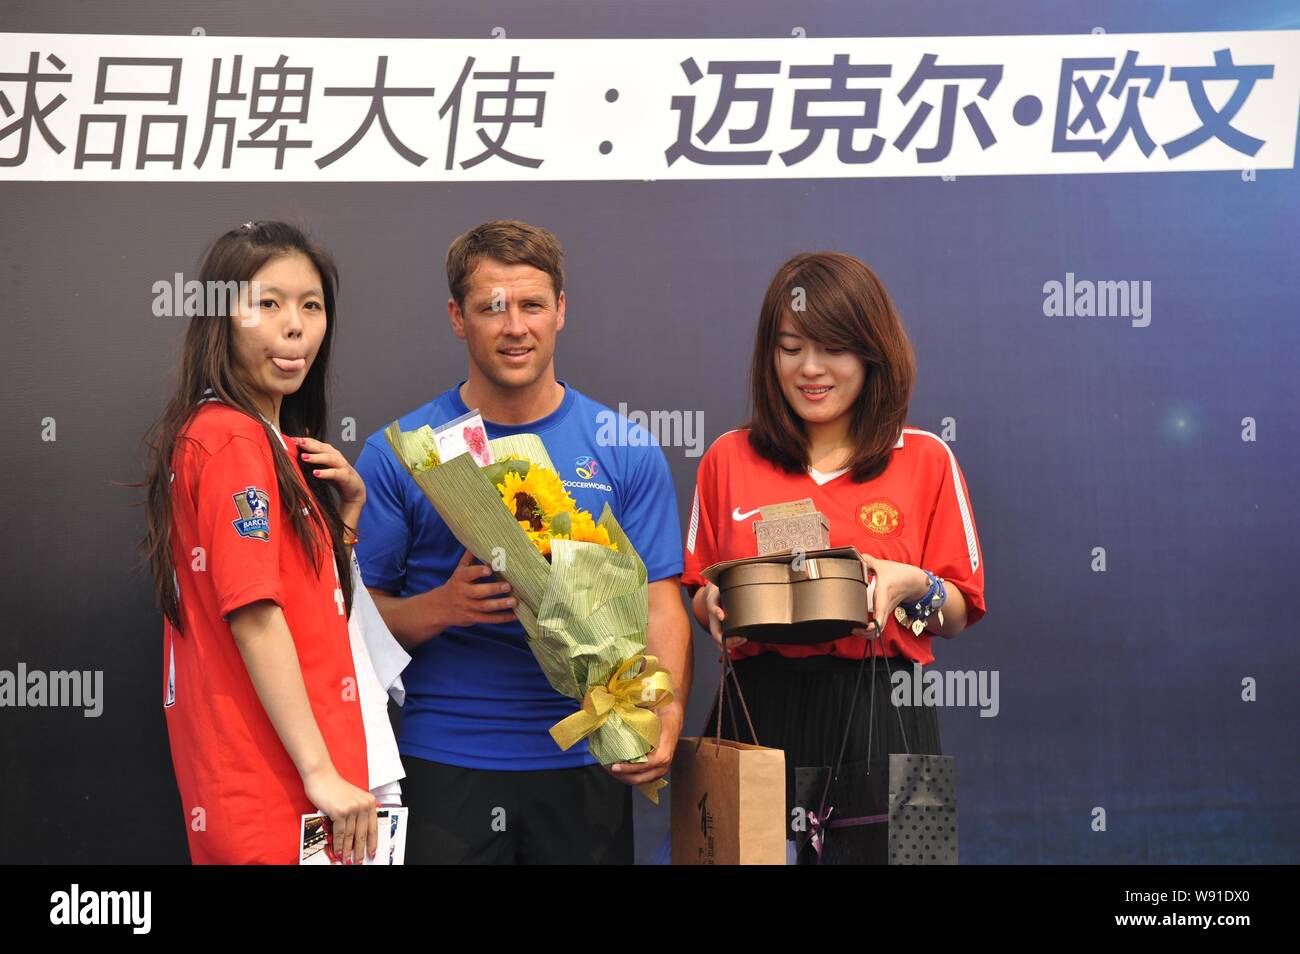 English soccer star Michael Owen, center, poses with female fans at a promotional event of European sports stadium business operator SoccerWorld durin Stock Photo